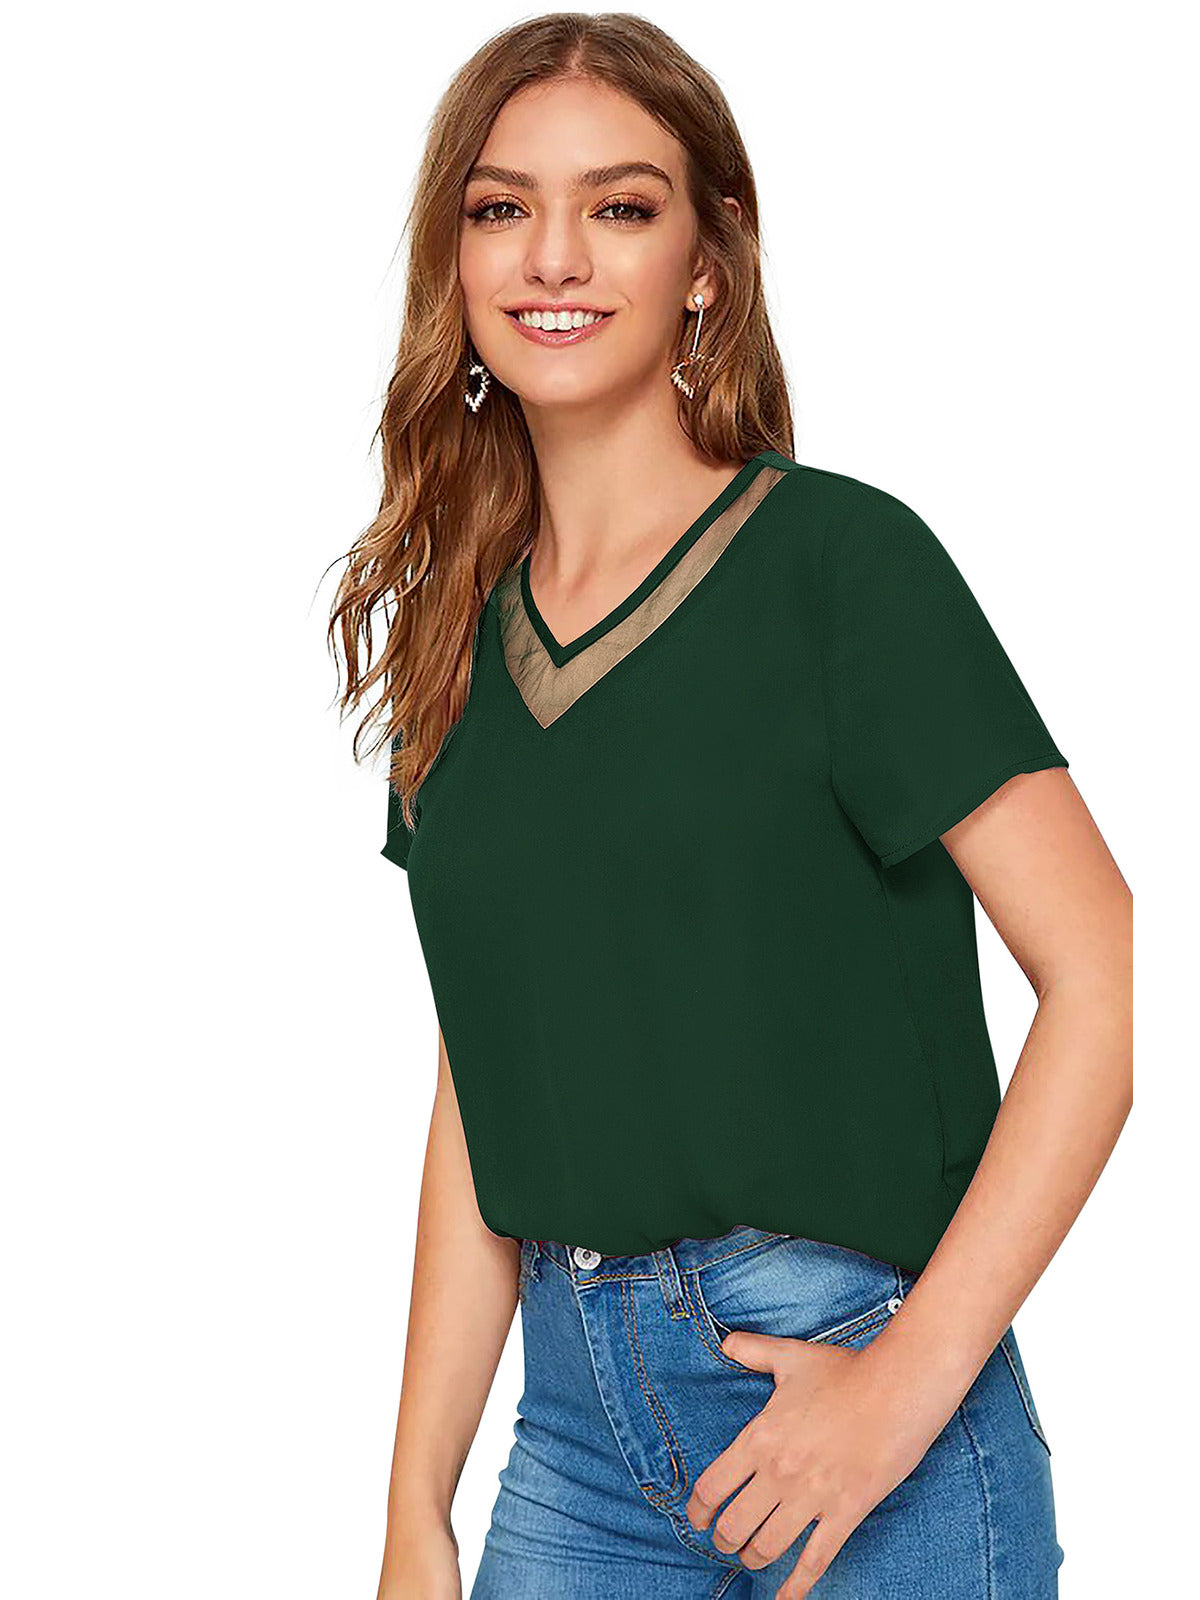 Odette Green Knit Fabric Top For Women